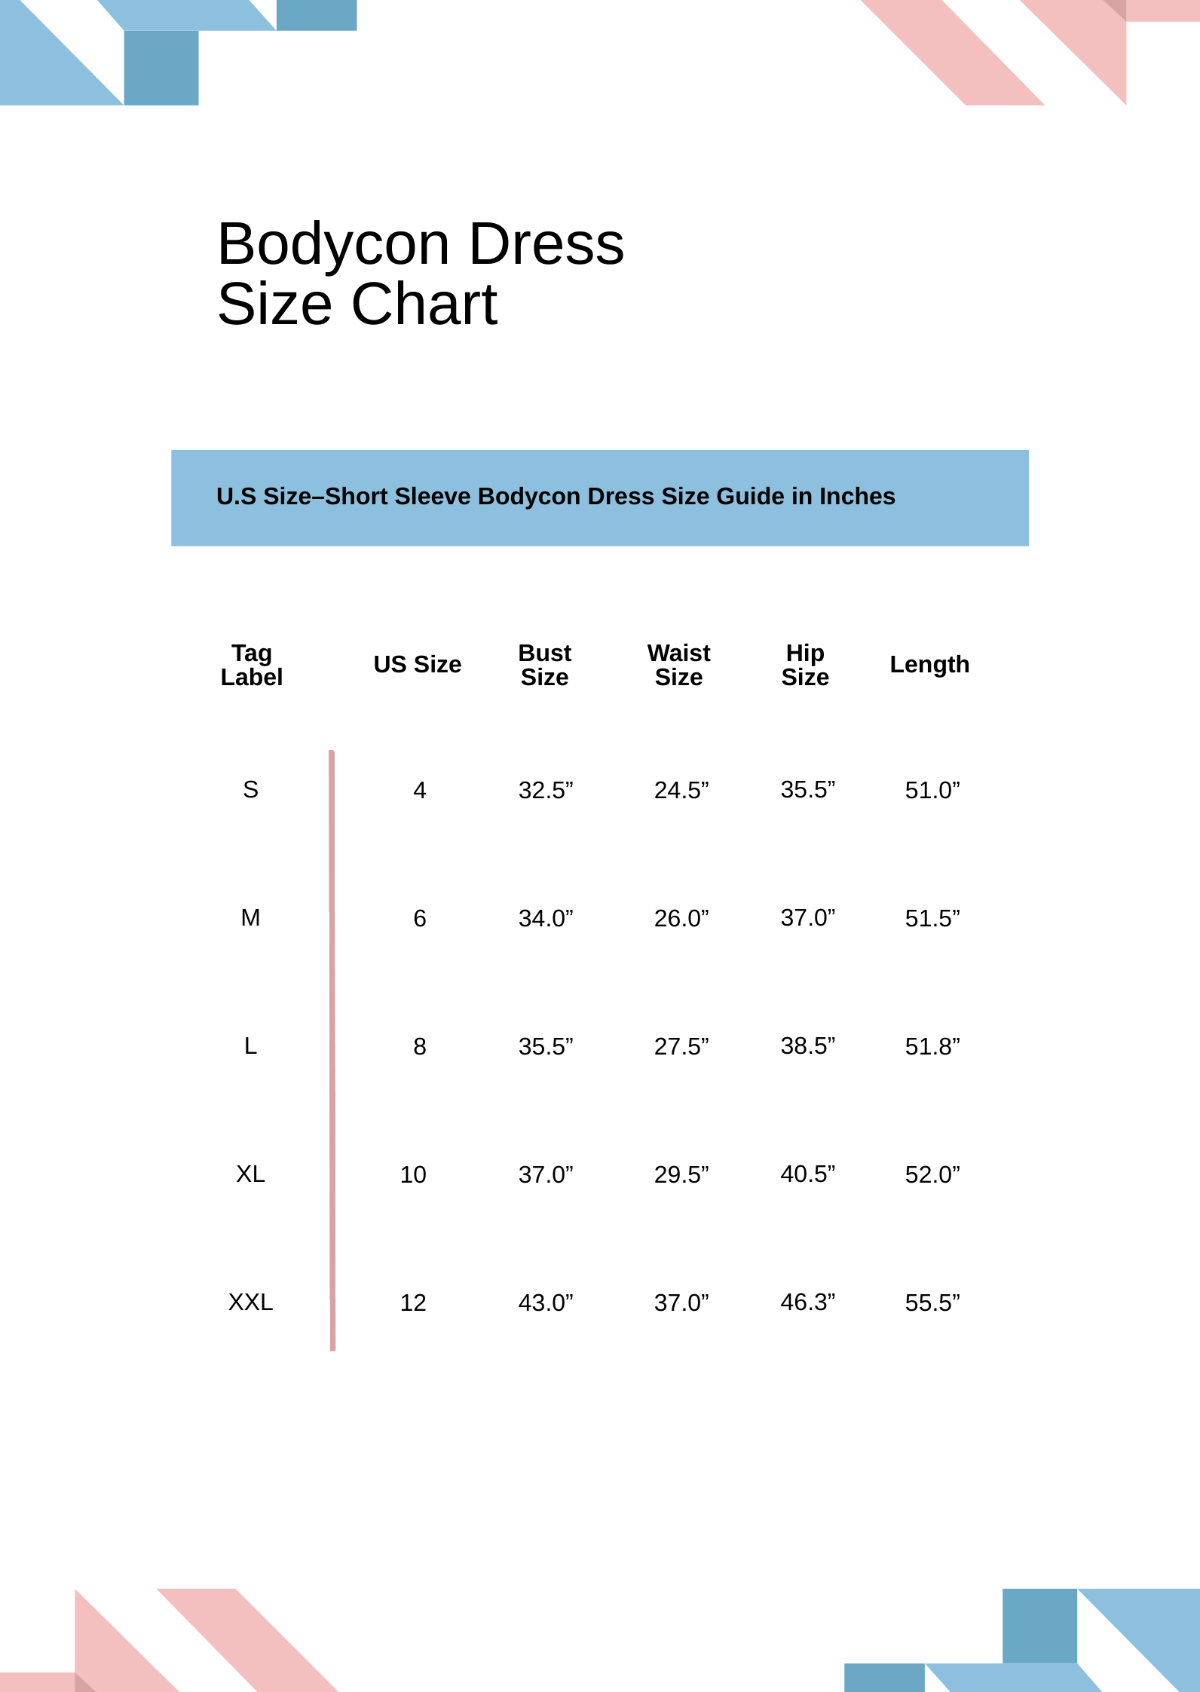 Free Dress Size Chart Templates And Examples Edit Online And Download